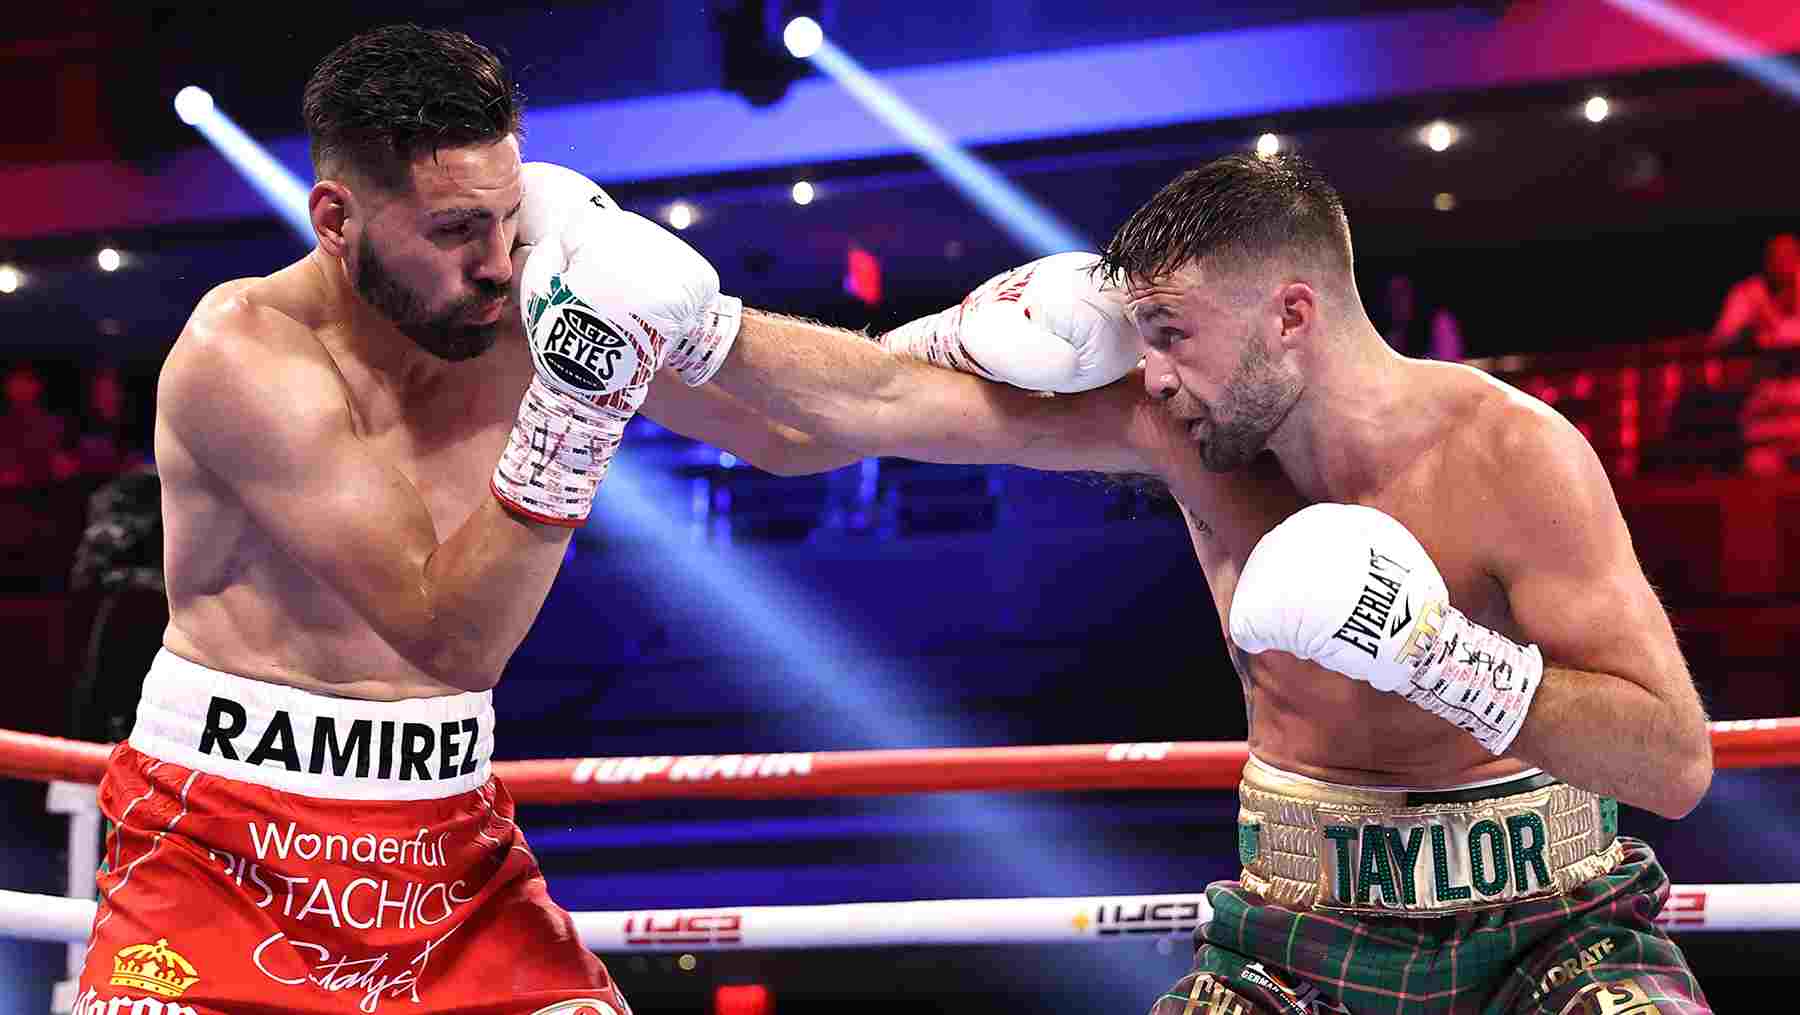 Jose Ramirez(L) and Josh Taylor(R) exchanged punches during their fight for the undisputed junior welterweight championship at Virgin Hotels Las Vegas on May 22, 2021.